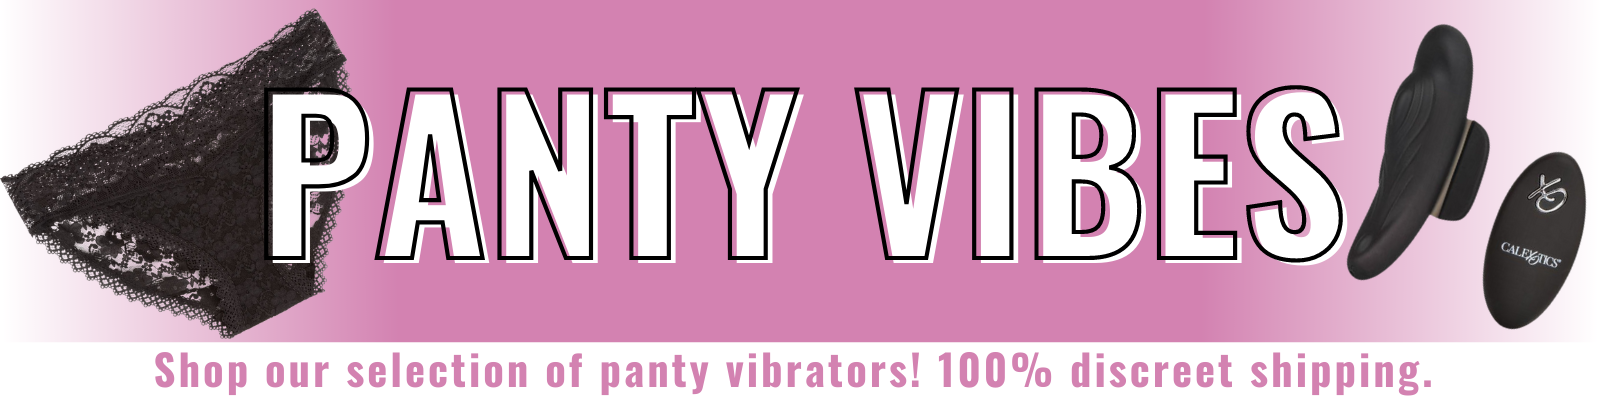 Banner for our panty vibrators collection. Banner reads: Panty vibes. Shop our selection of panty vibrators! 100% discreet shipping.